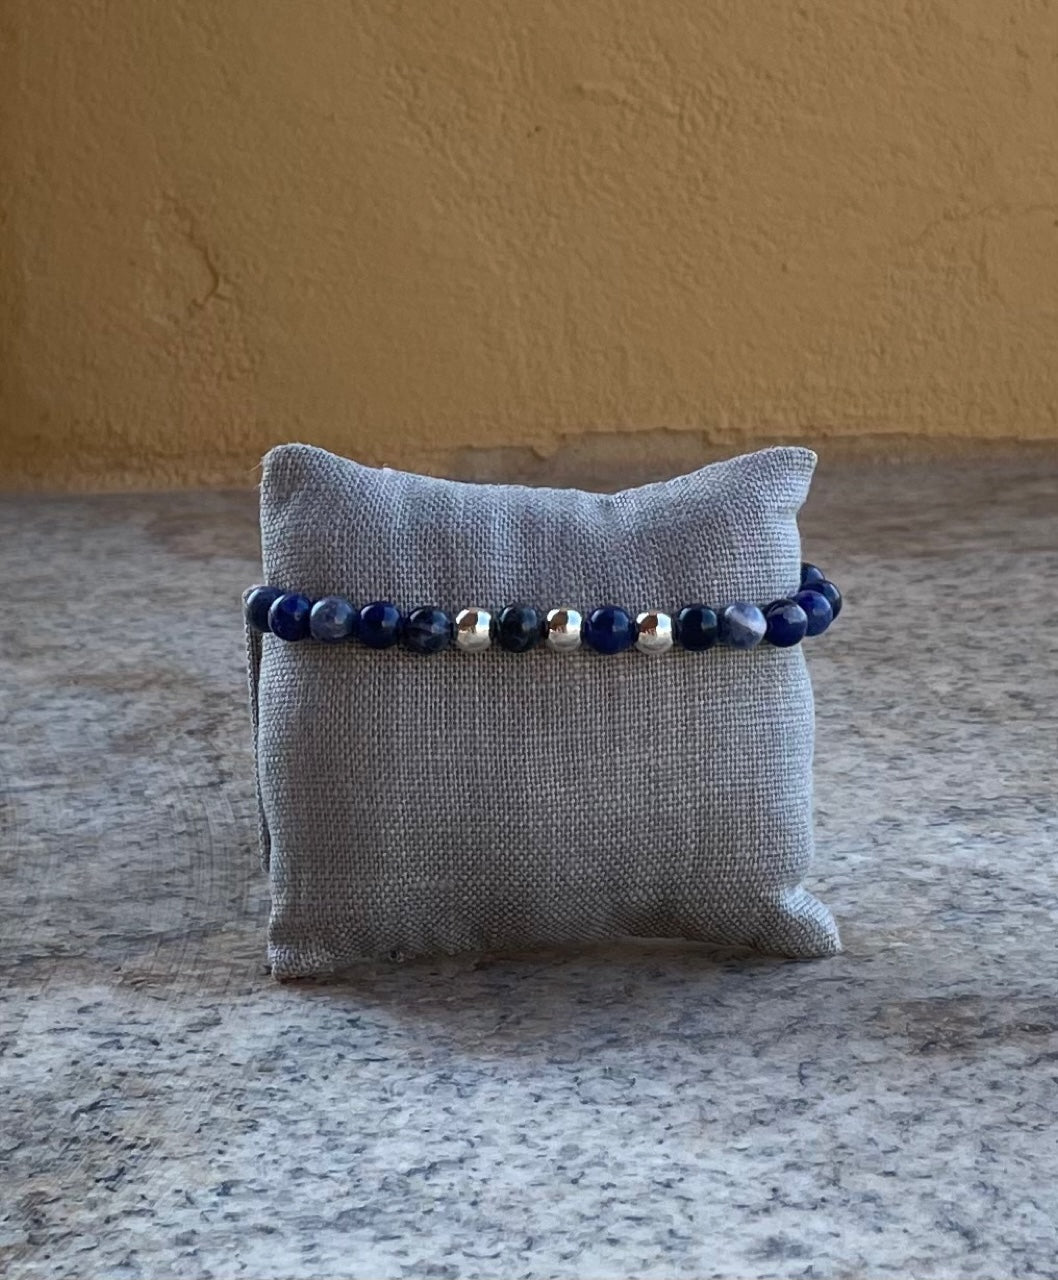 Stretch Bracelet - Blue jean color Sodalite with sterling silver beads